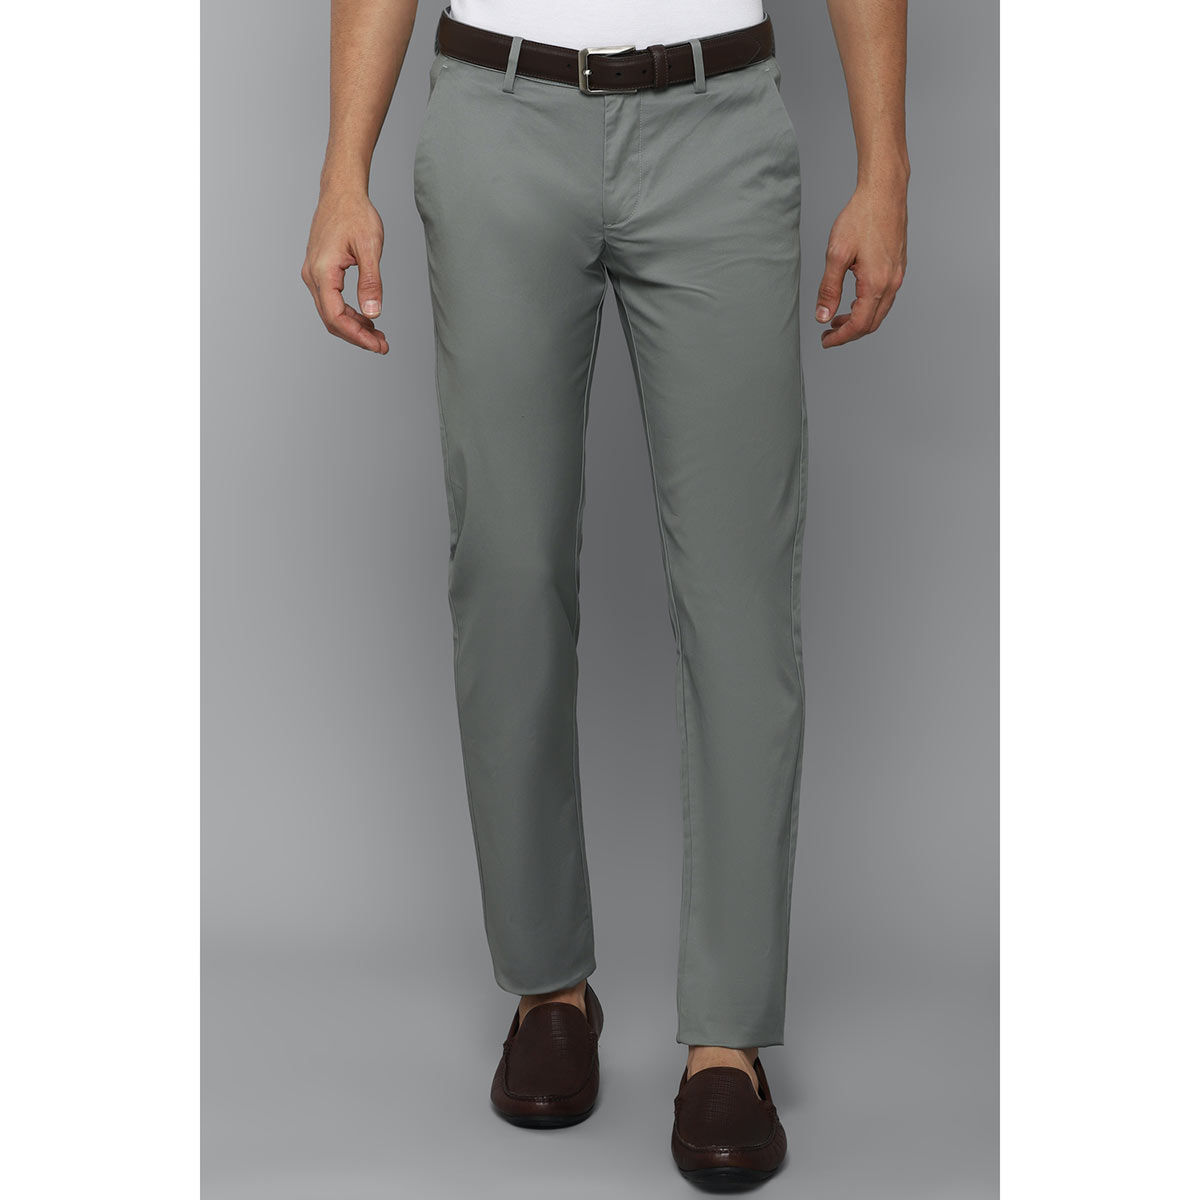 Buy Allen Solly Solid Cotton Blend Regular Fit Mens Casual Trousers (Khaki,  30) at Amazon.in